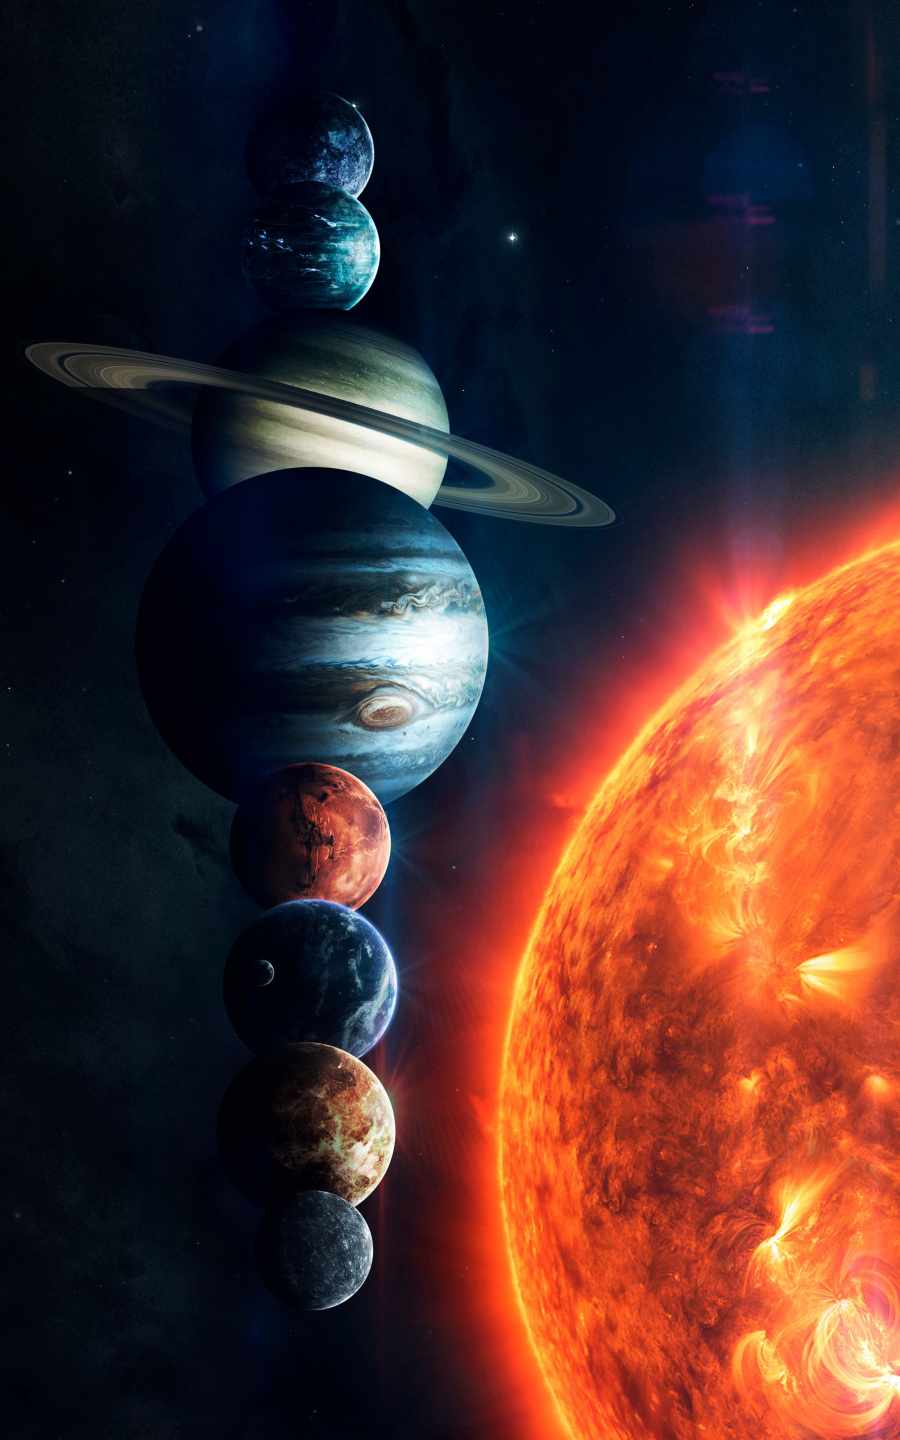 Our Solar System IPhone Wallpaper Wallpaper, iPhone Wallpaper